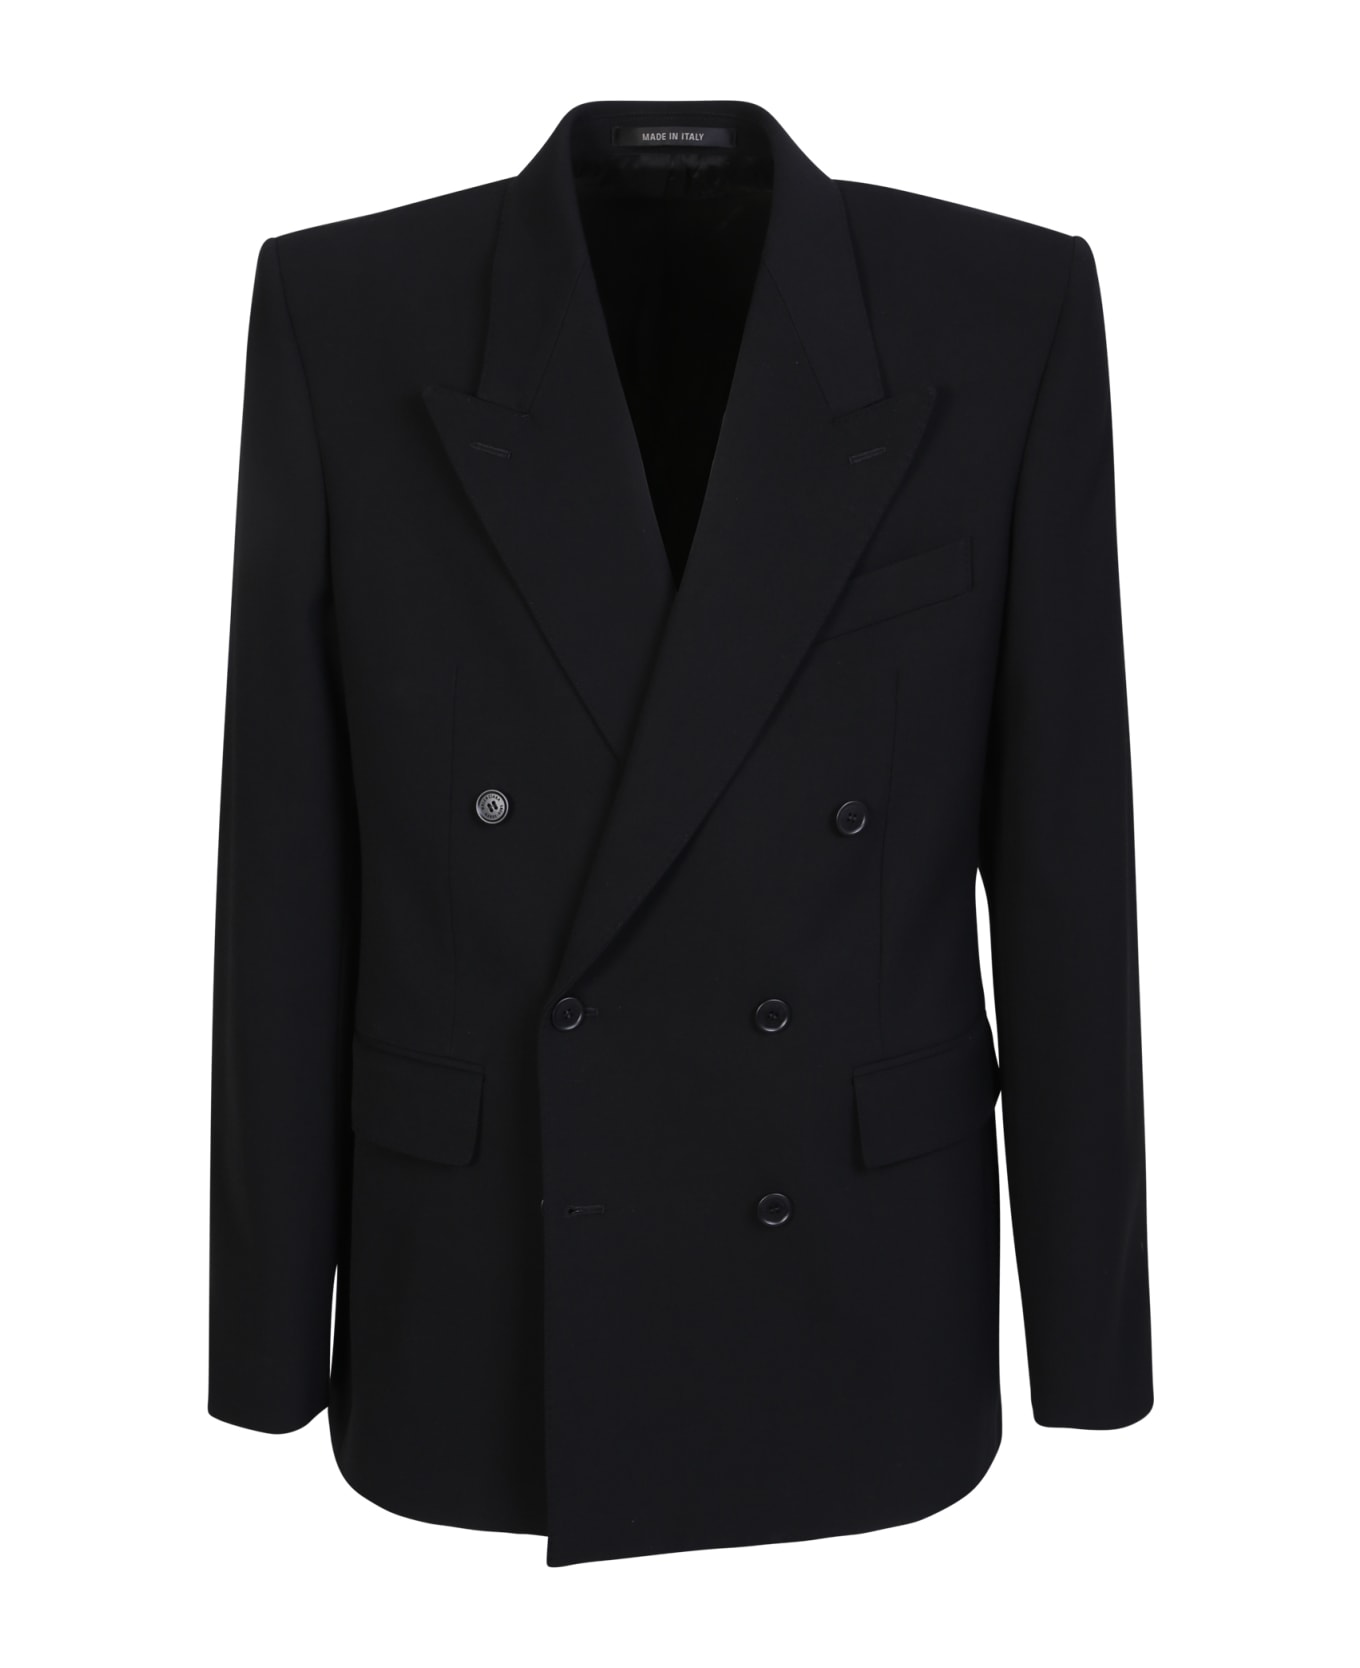 Balenciaga Double-breasted Blazer With Peaked Revers - Black ブレザー